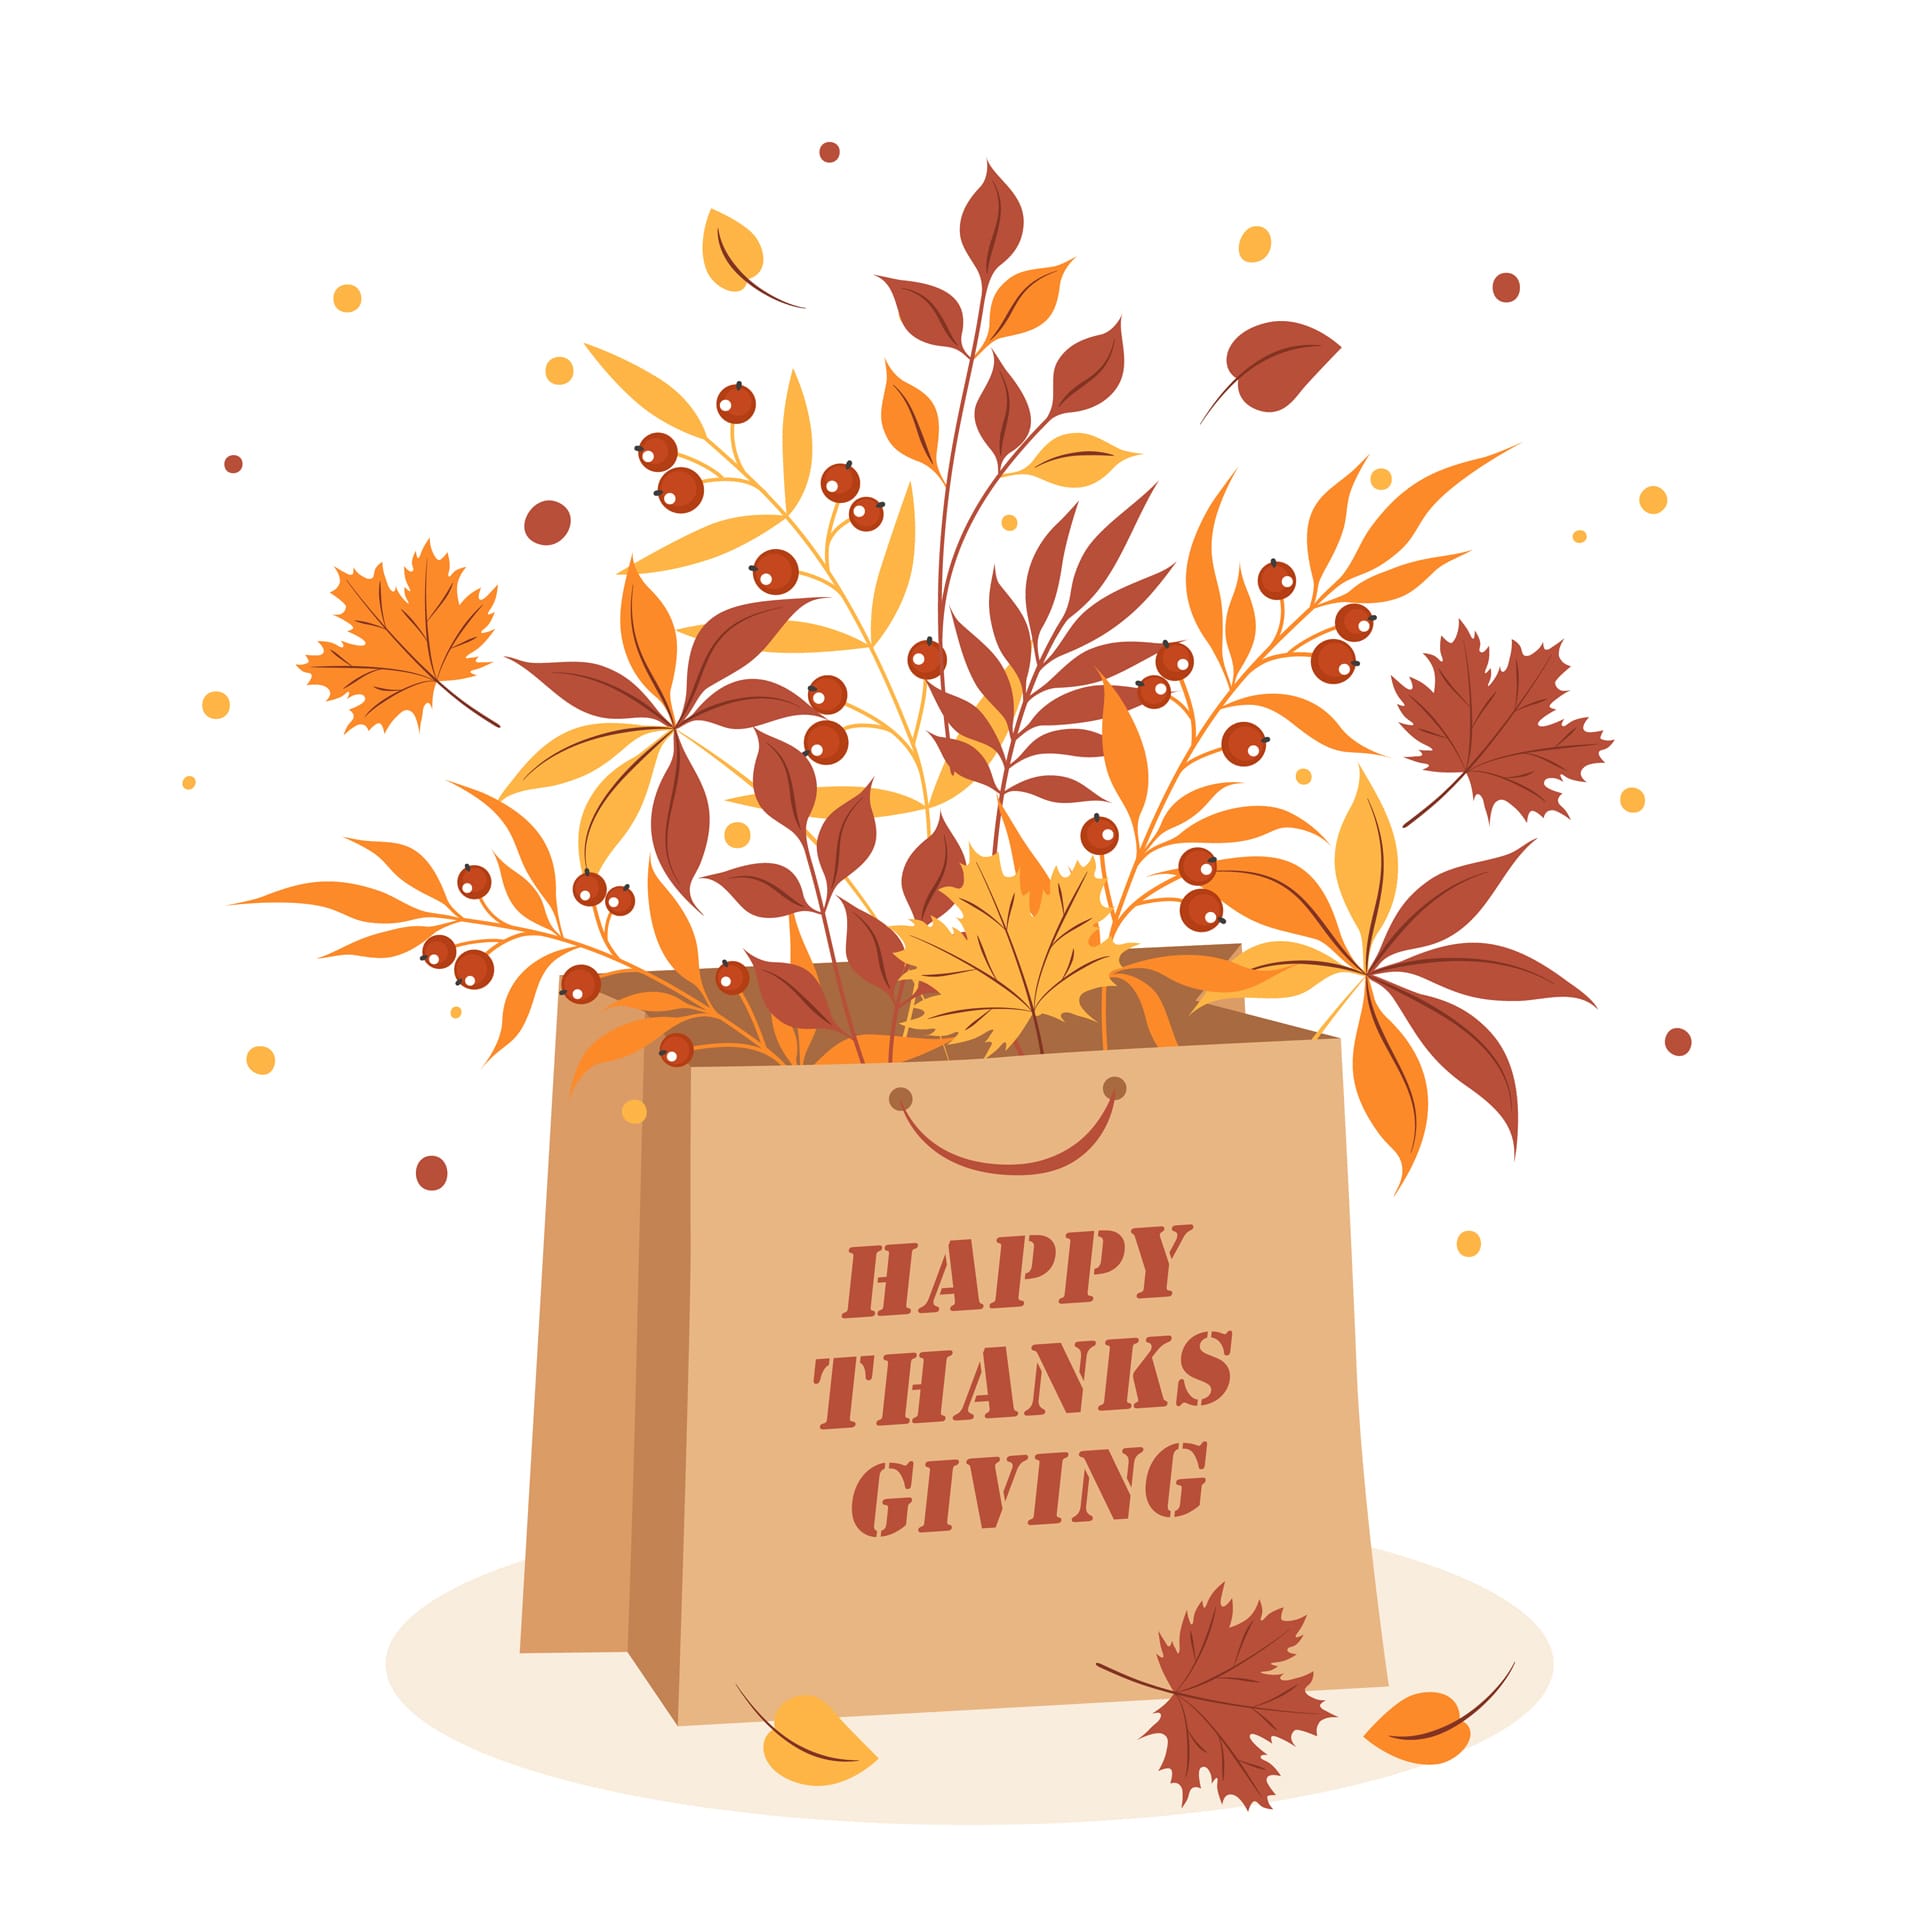 Thanksgiving clipart banner with paper bag leaves poster flyer